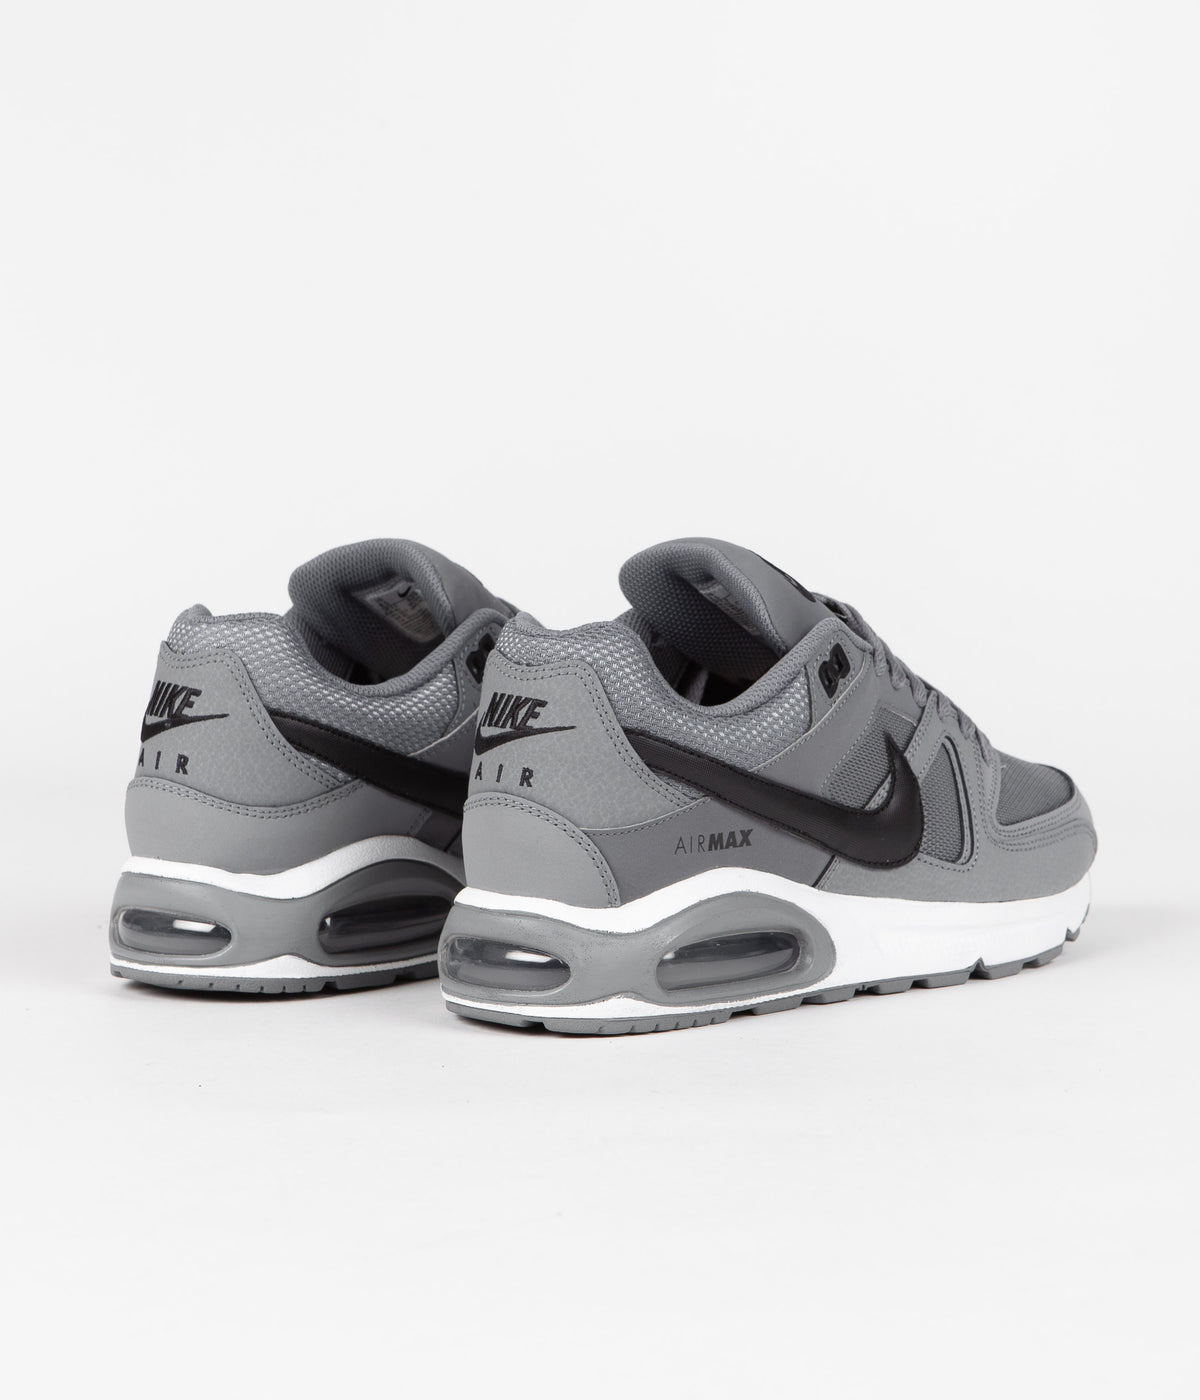 Nike Air Max Command Shoes - Cool Grey / Black - White | Always in